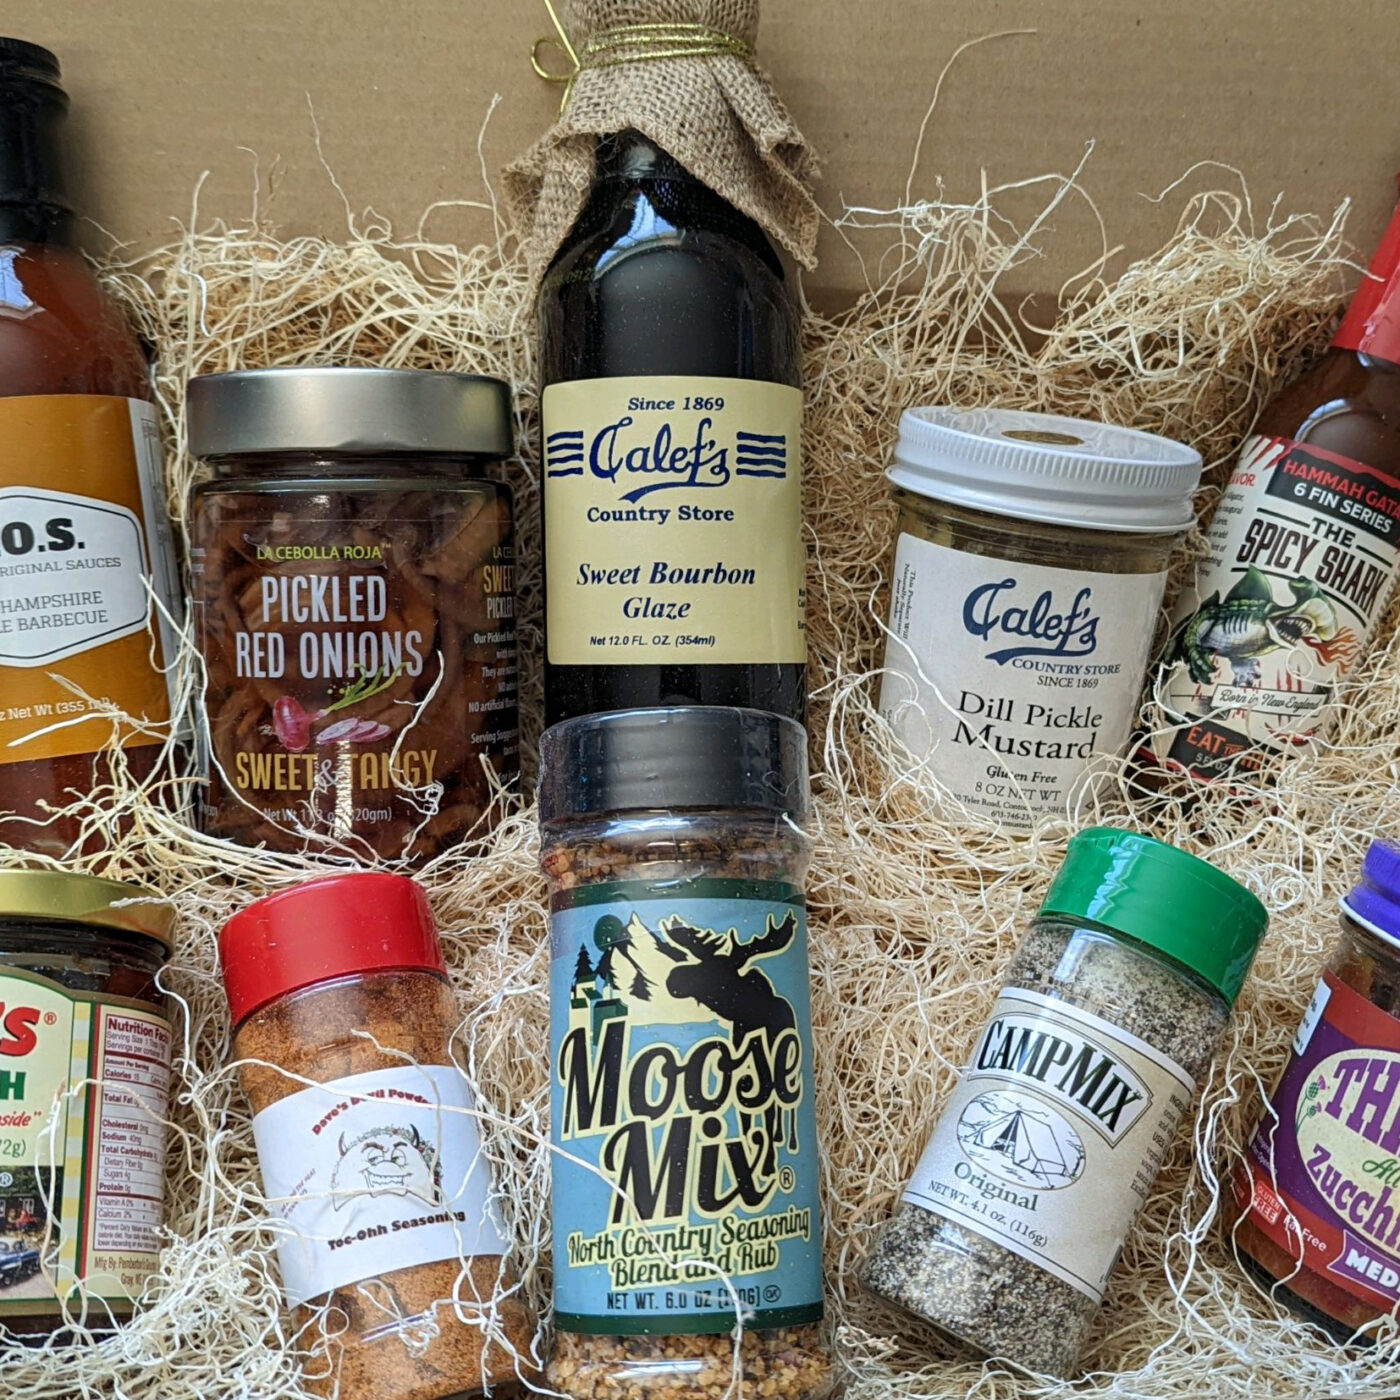 Calef's Condiment King gift box filled with bestselling condiments